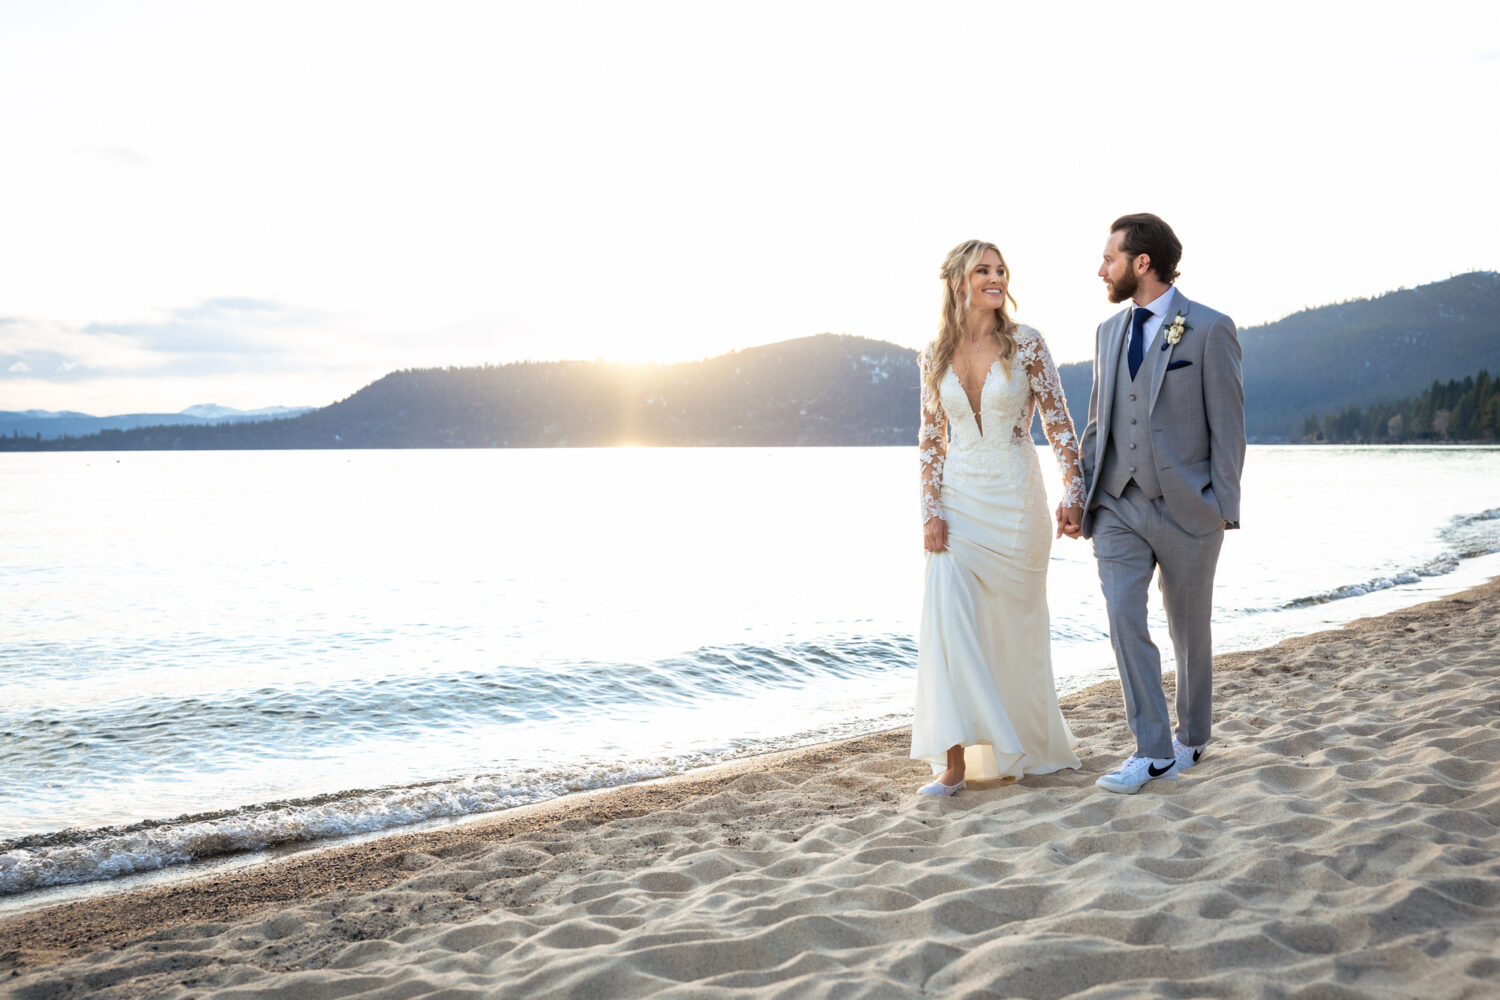 A bride and groom enjoy a sunset stroll by the water at their Hyatt Lake Tahoe beach wedding.